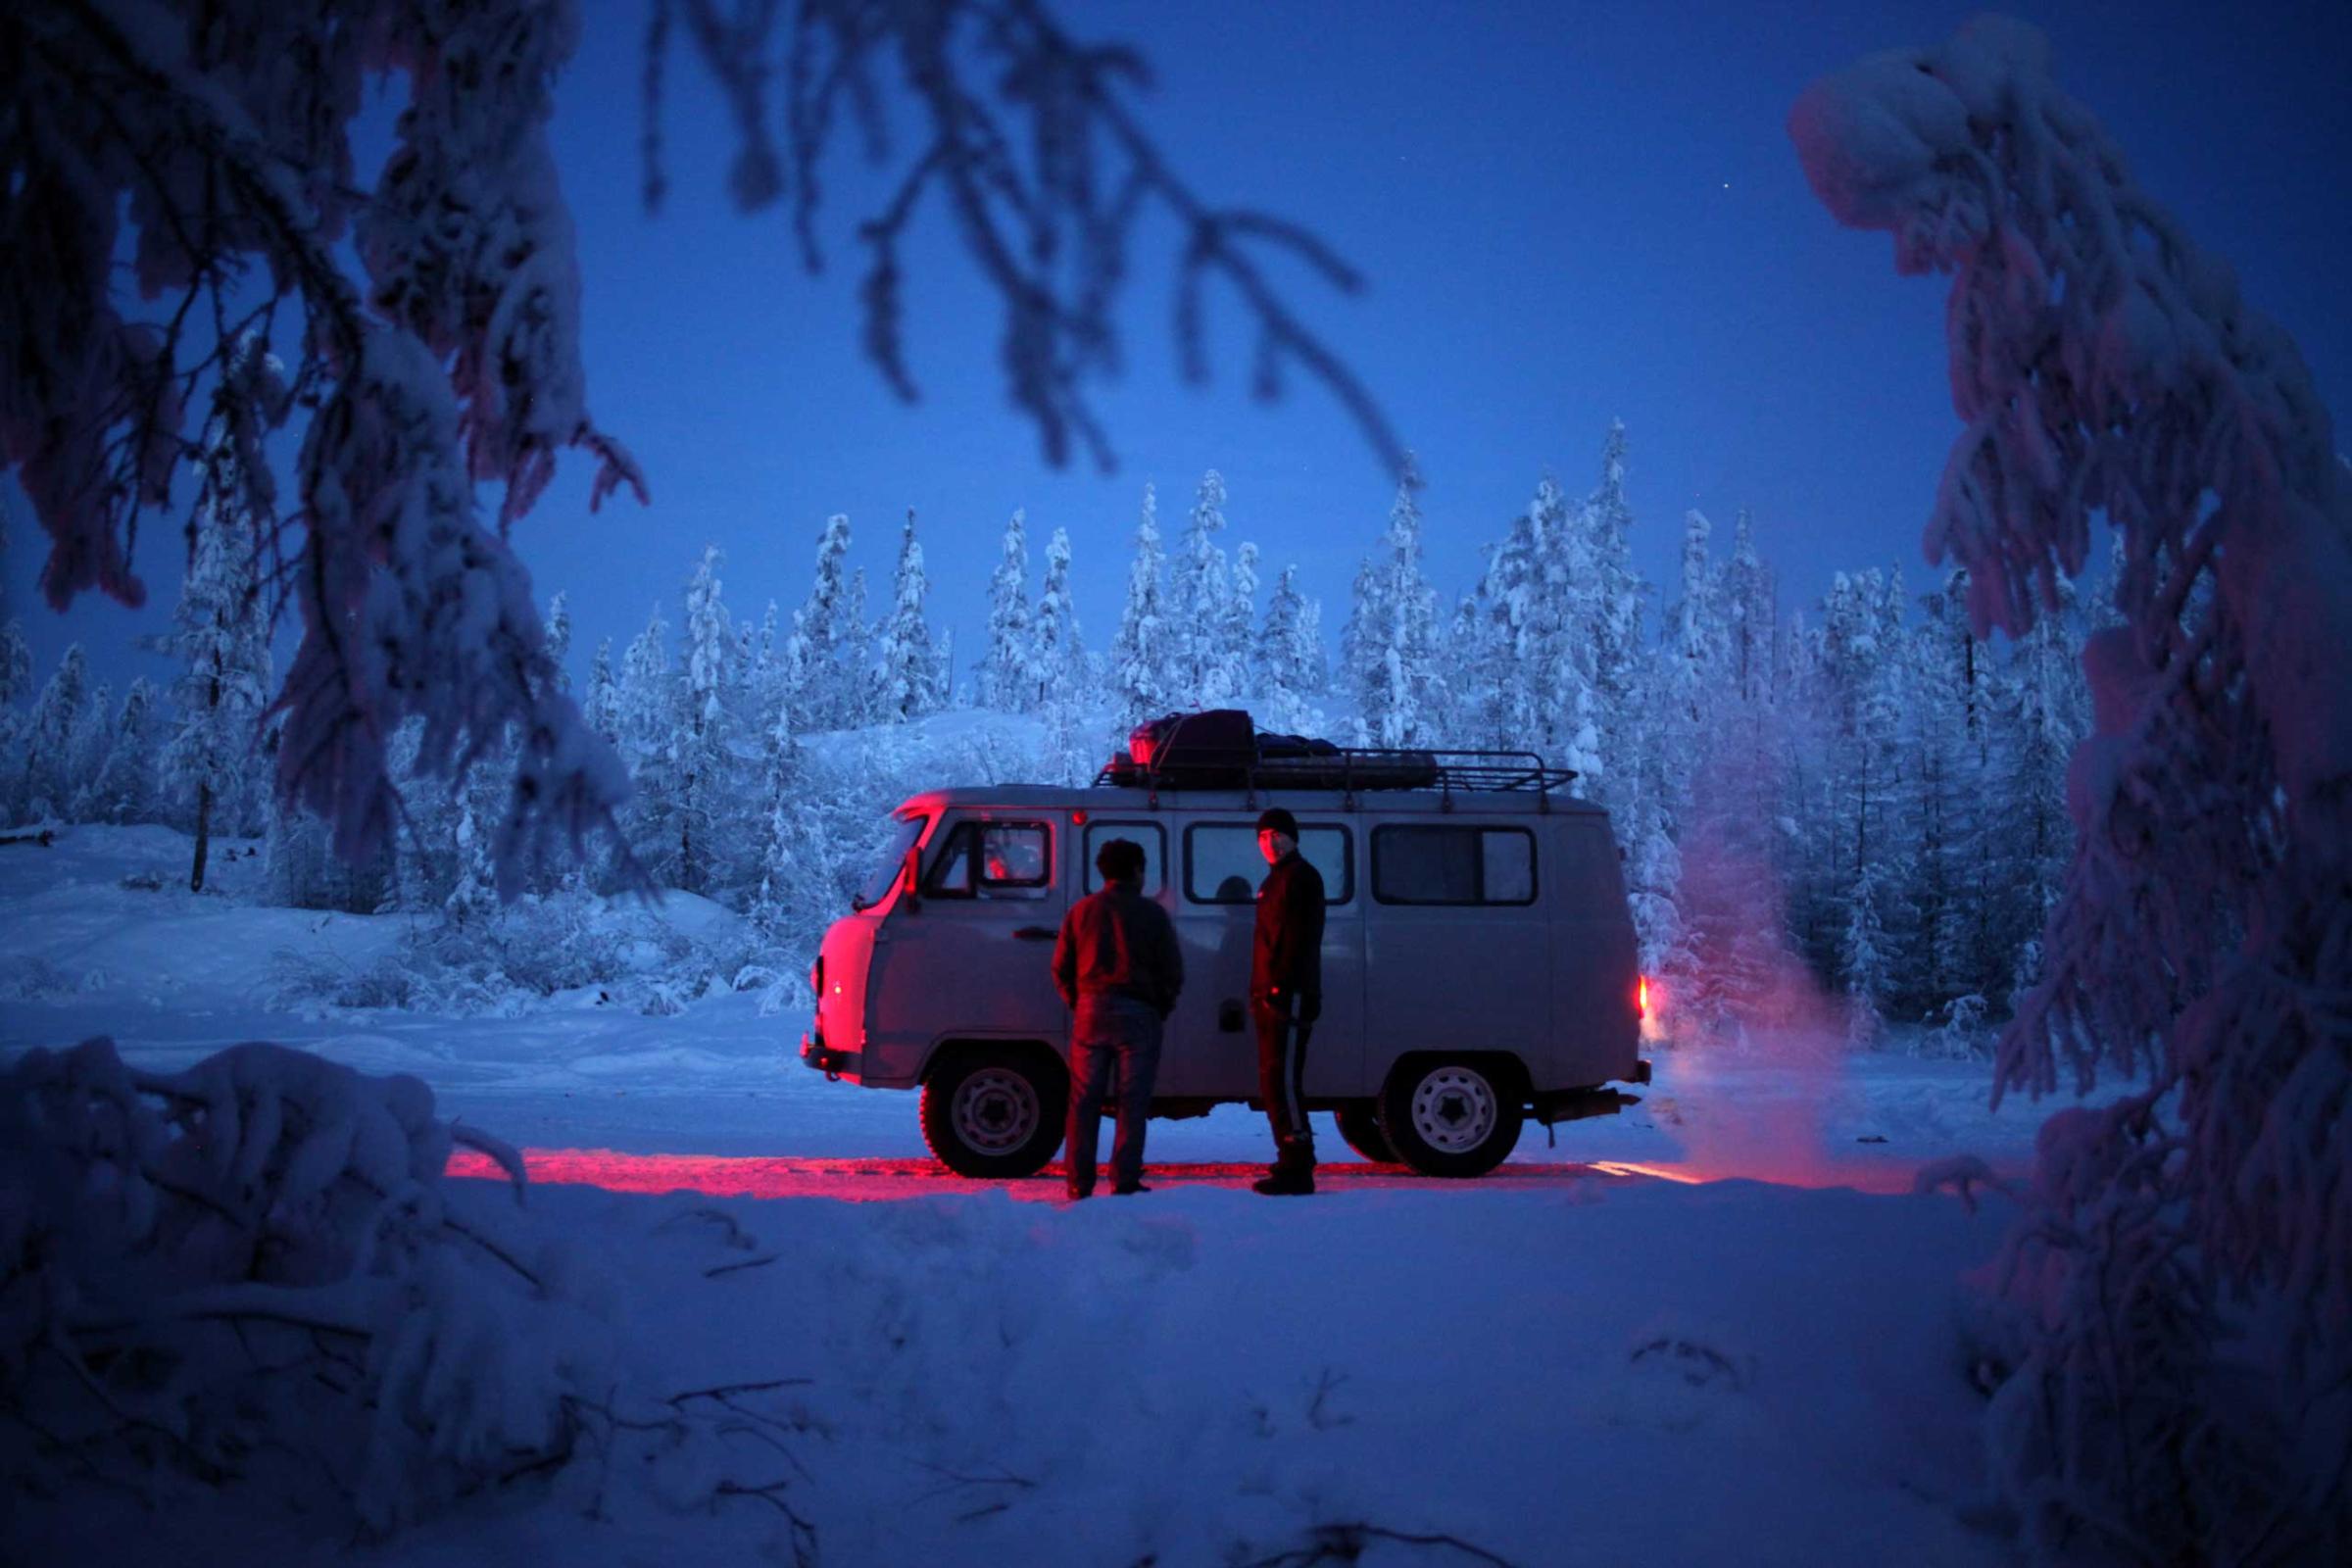 This staunch little van would carry us the two days from Yakutsk to Oymyakon. The soviet-era Uazik vans are popular in deep Siberia for their resistance to cold, and industrial-sized heater in the passenger compartment.